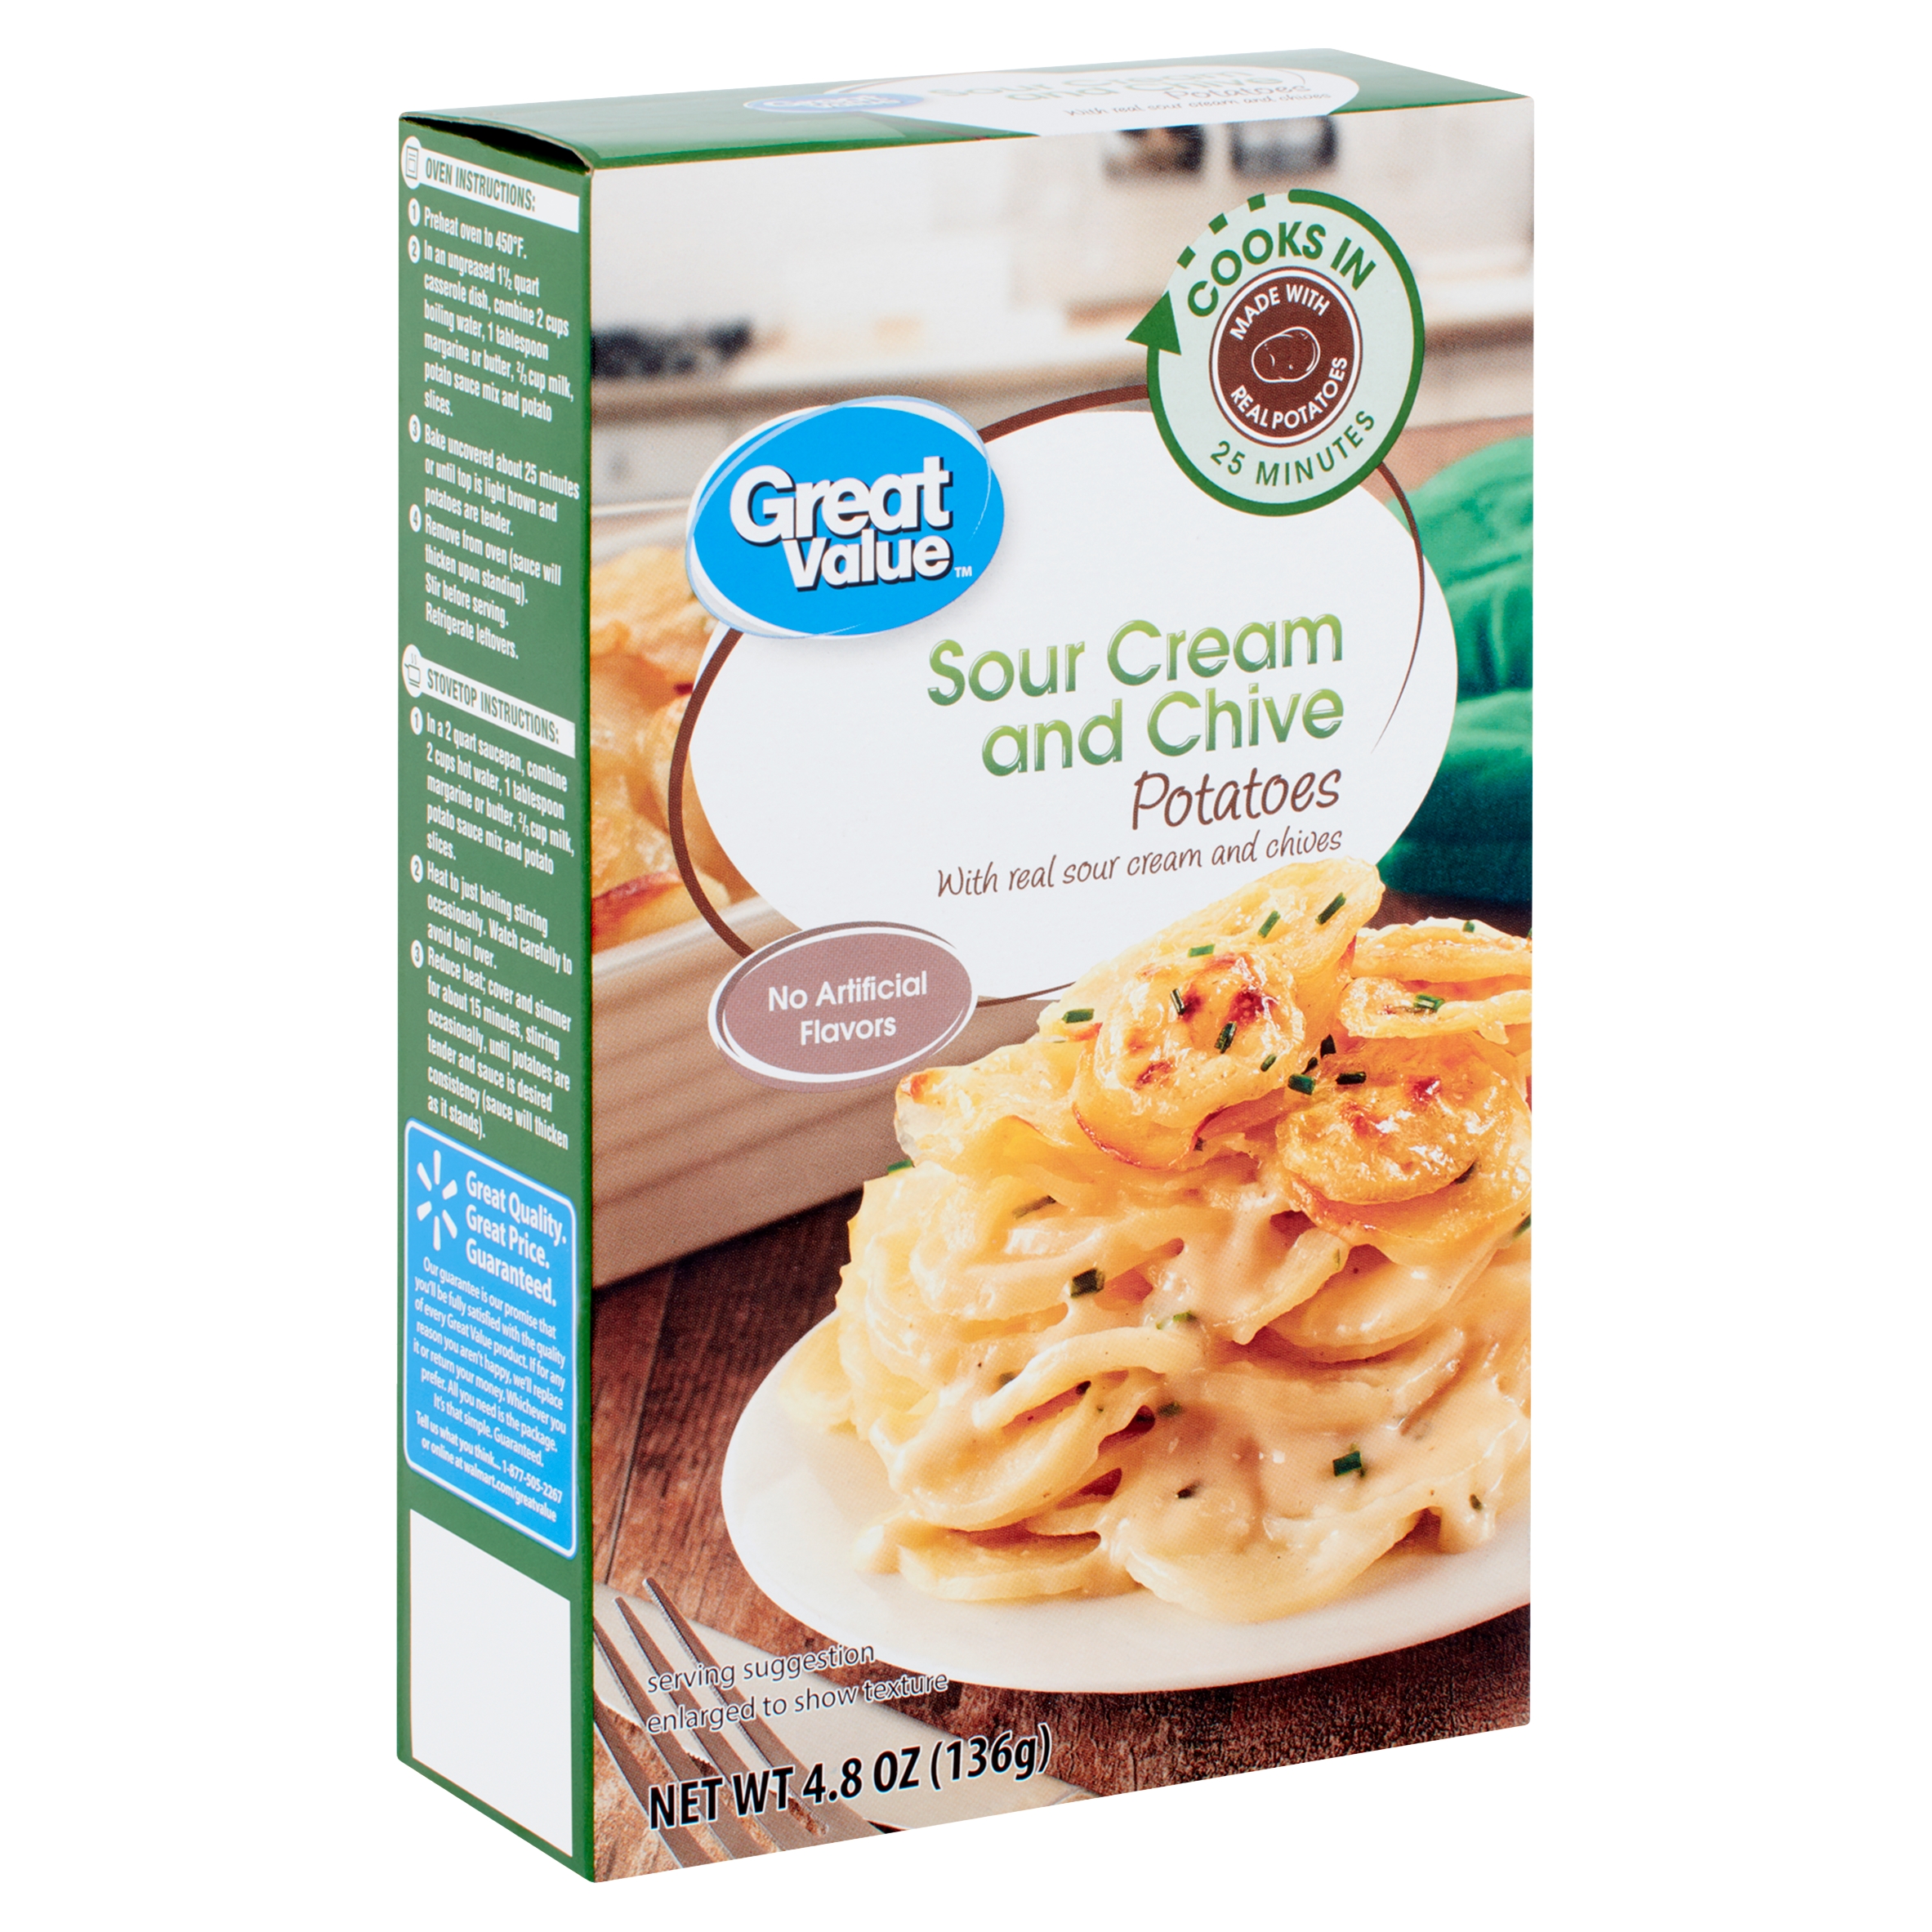 Great Value Sour Cream and Chive Potatoes, 4.8 Oz Image